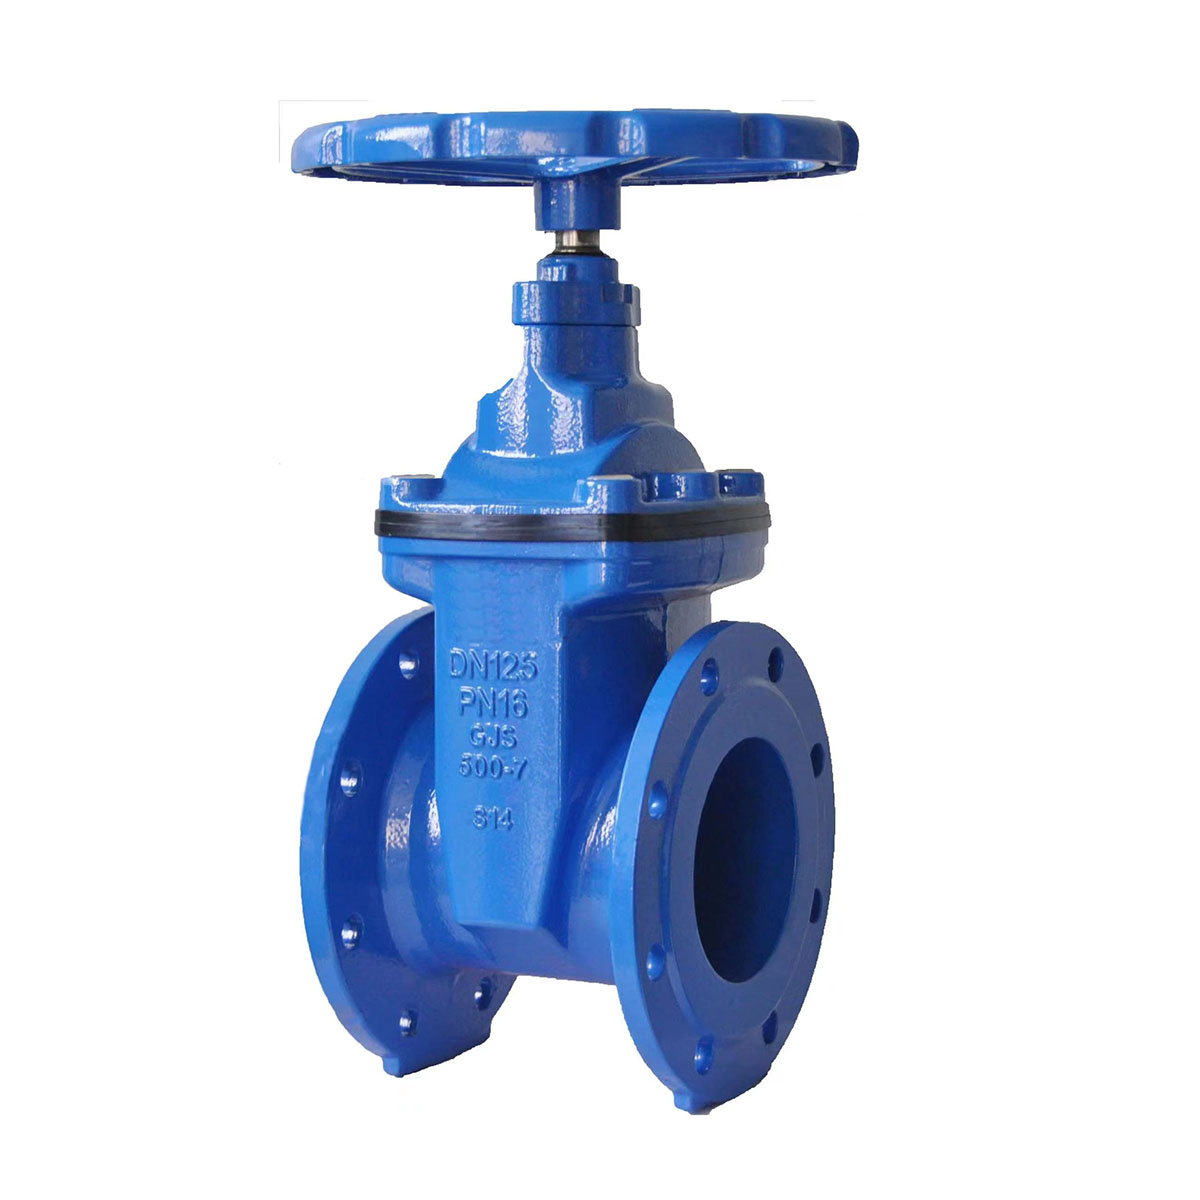 Soft Sealing Gate Valve in Ductile Iron